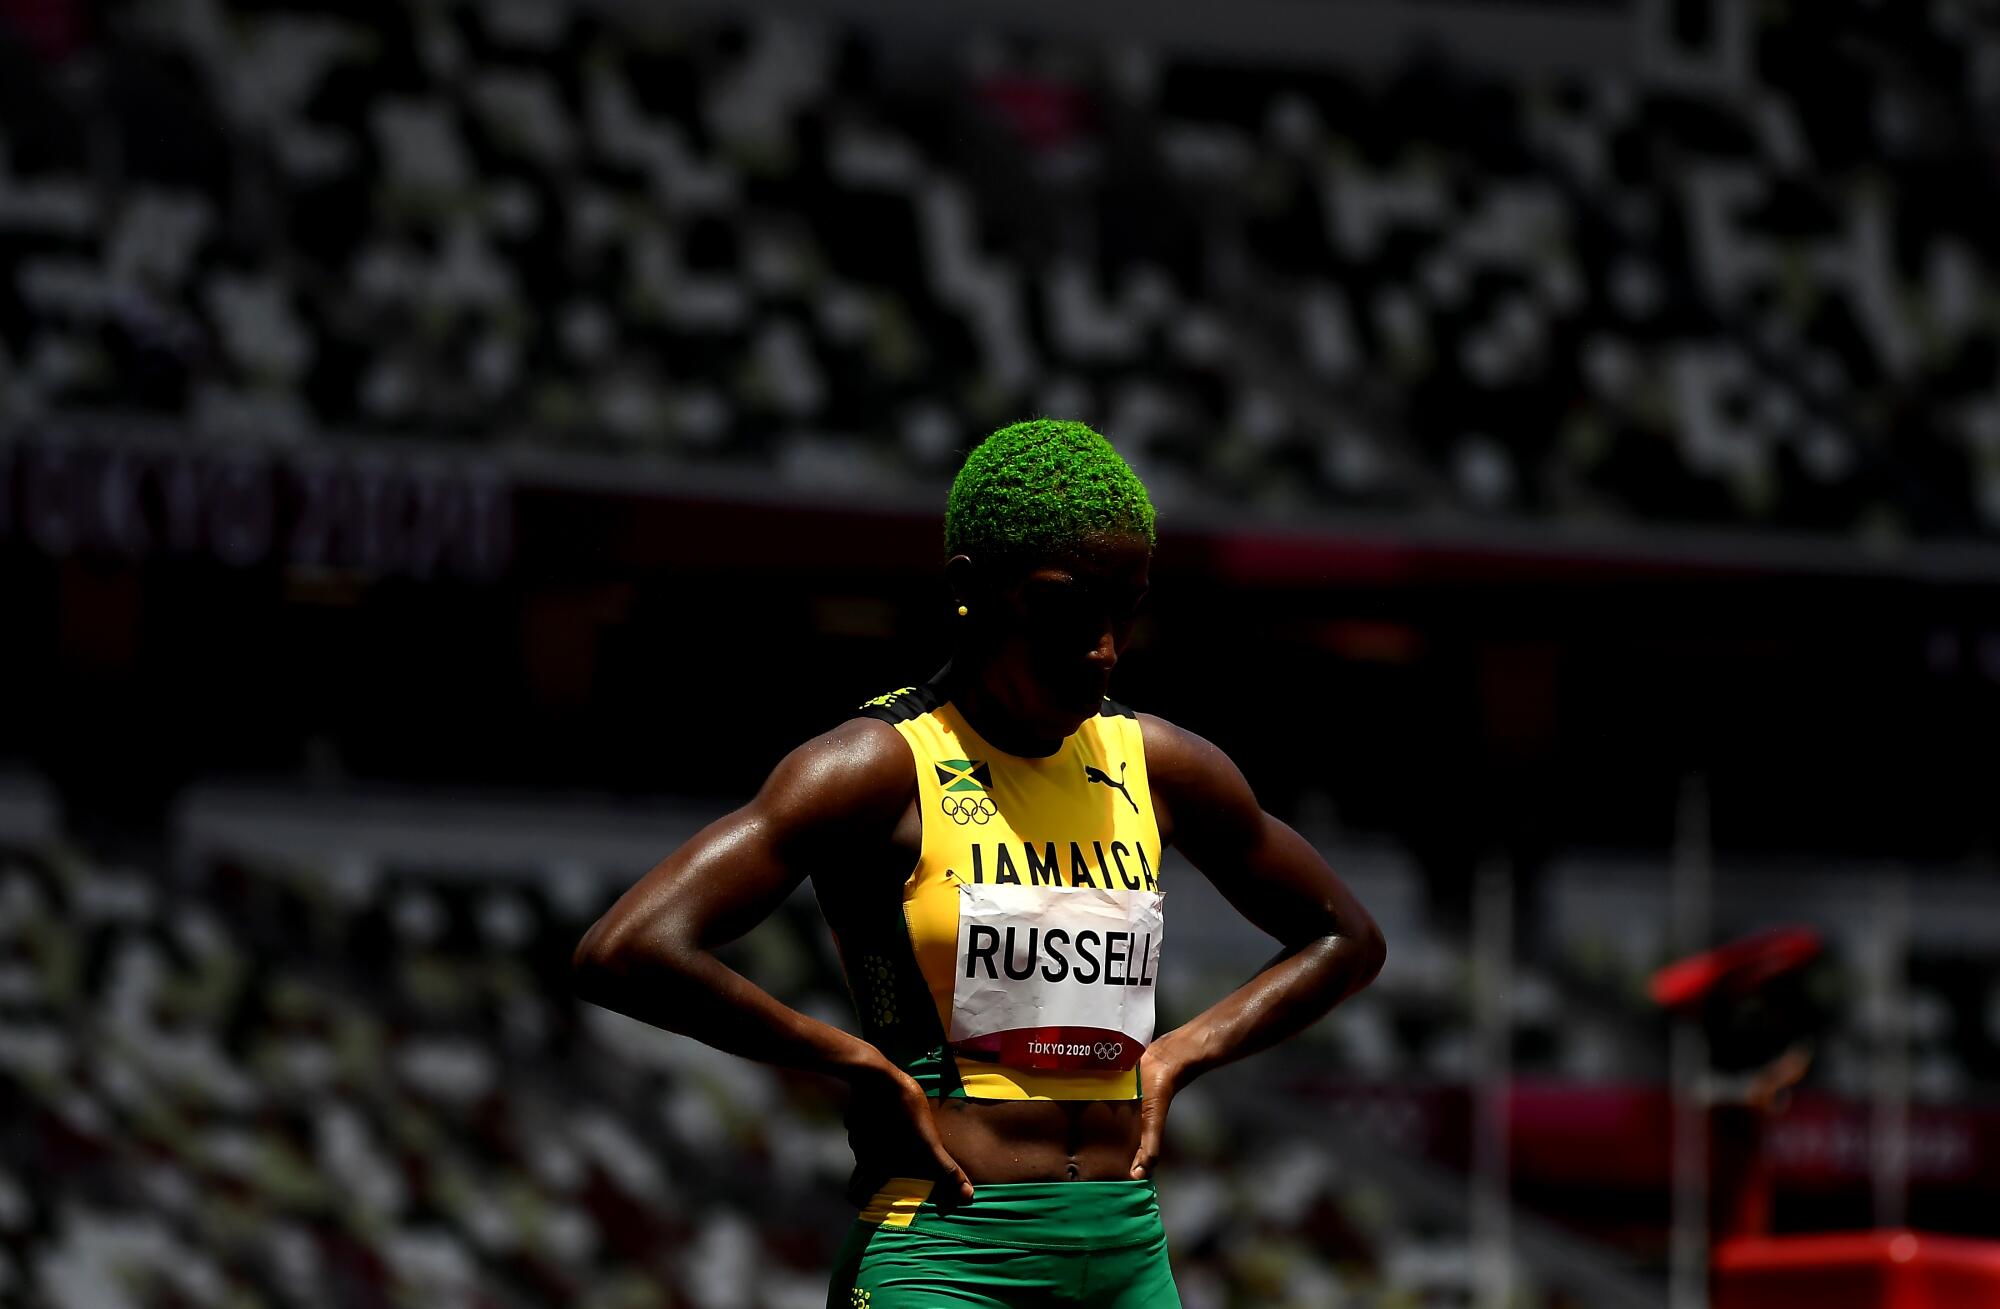 Jamaica's Janieve Russell prepares to enter the starting blocks for the 400m hurdles.